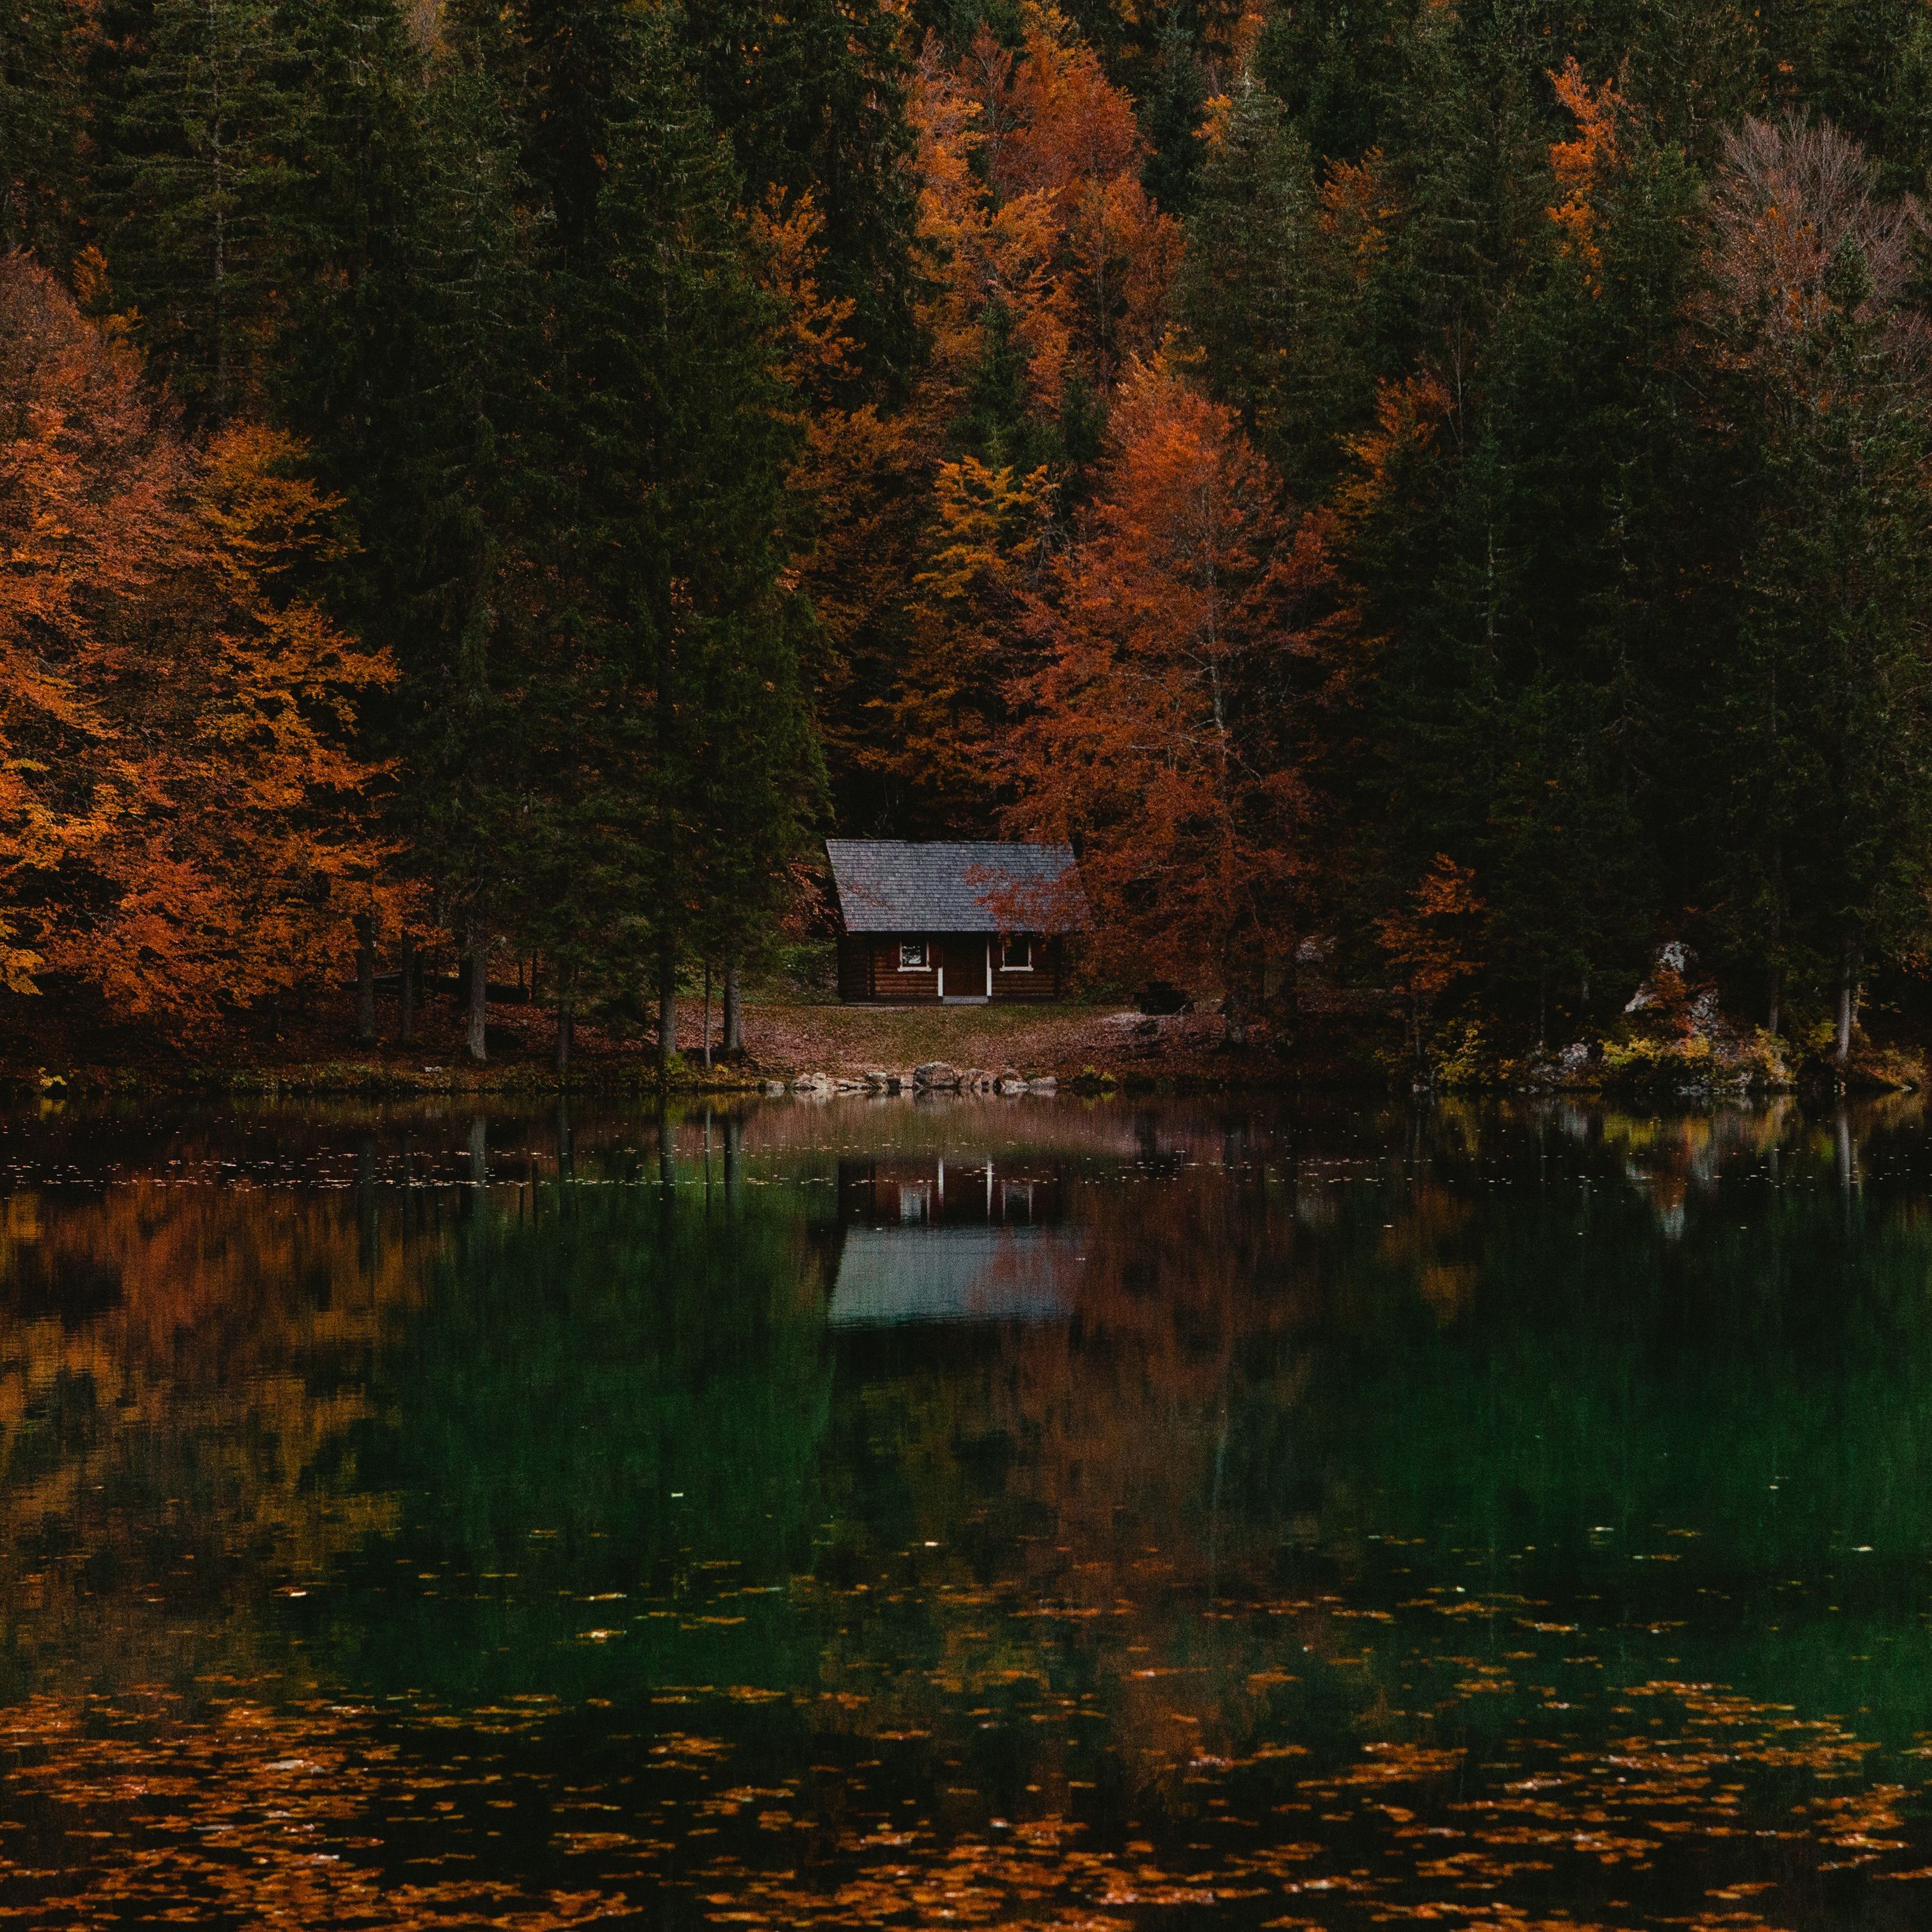 Download wallpaper 2780x2780 forest, house, autumn, lake, italy ipad air, ipad air ipad ipad ipad mini ipad mini ipad mini ipad pro 9.7 for parallax HD background